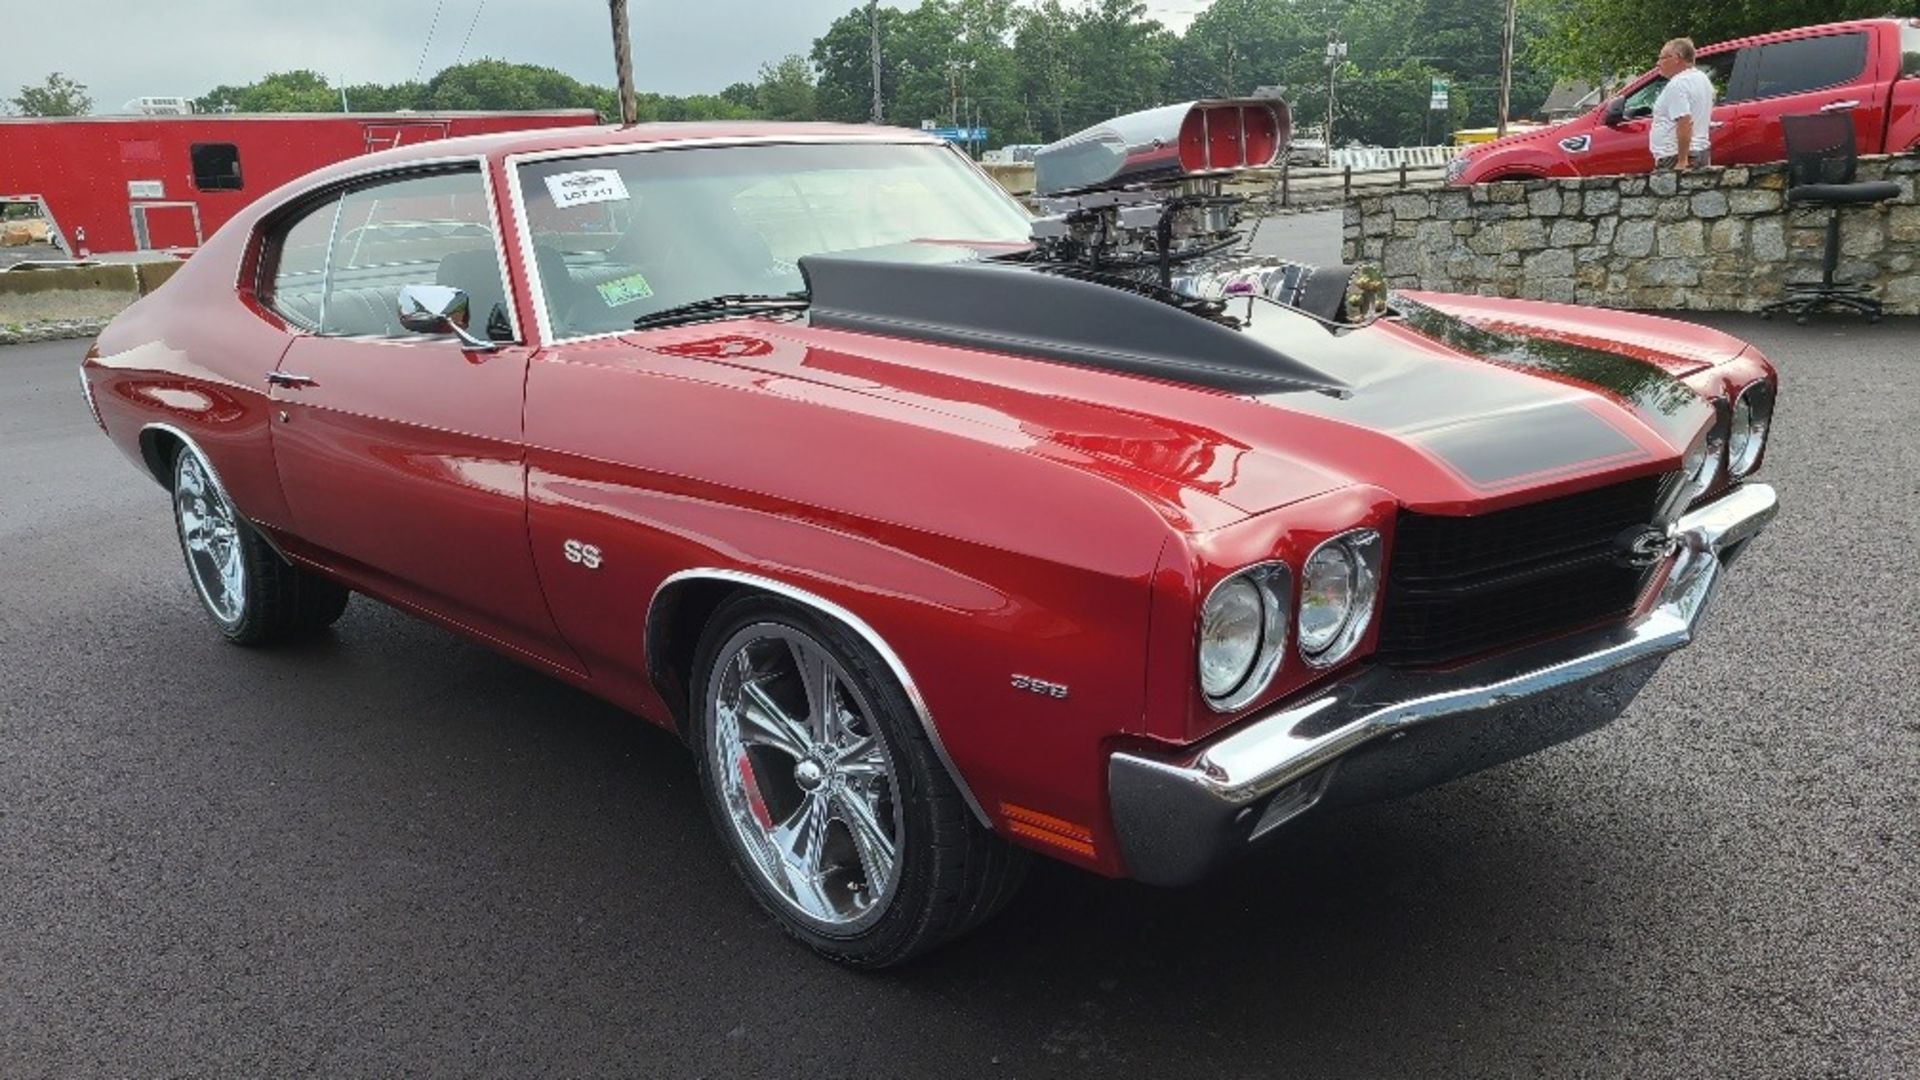 1970 Chevelle Ss - Image 12 of 18